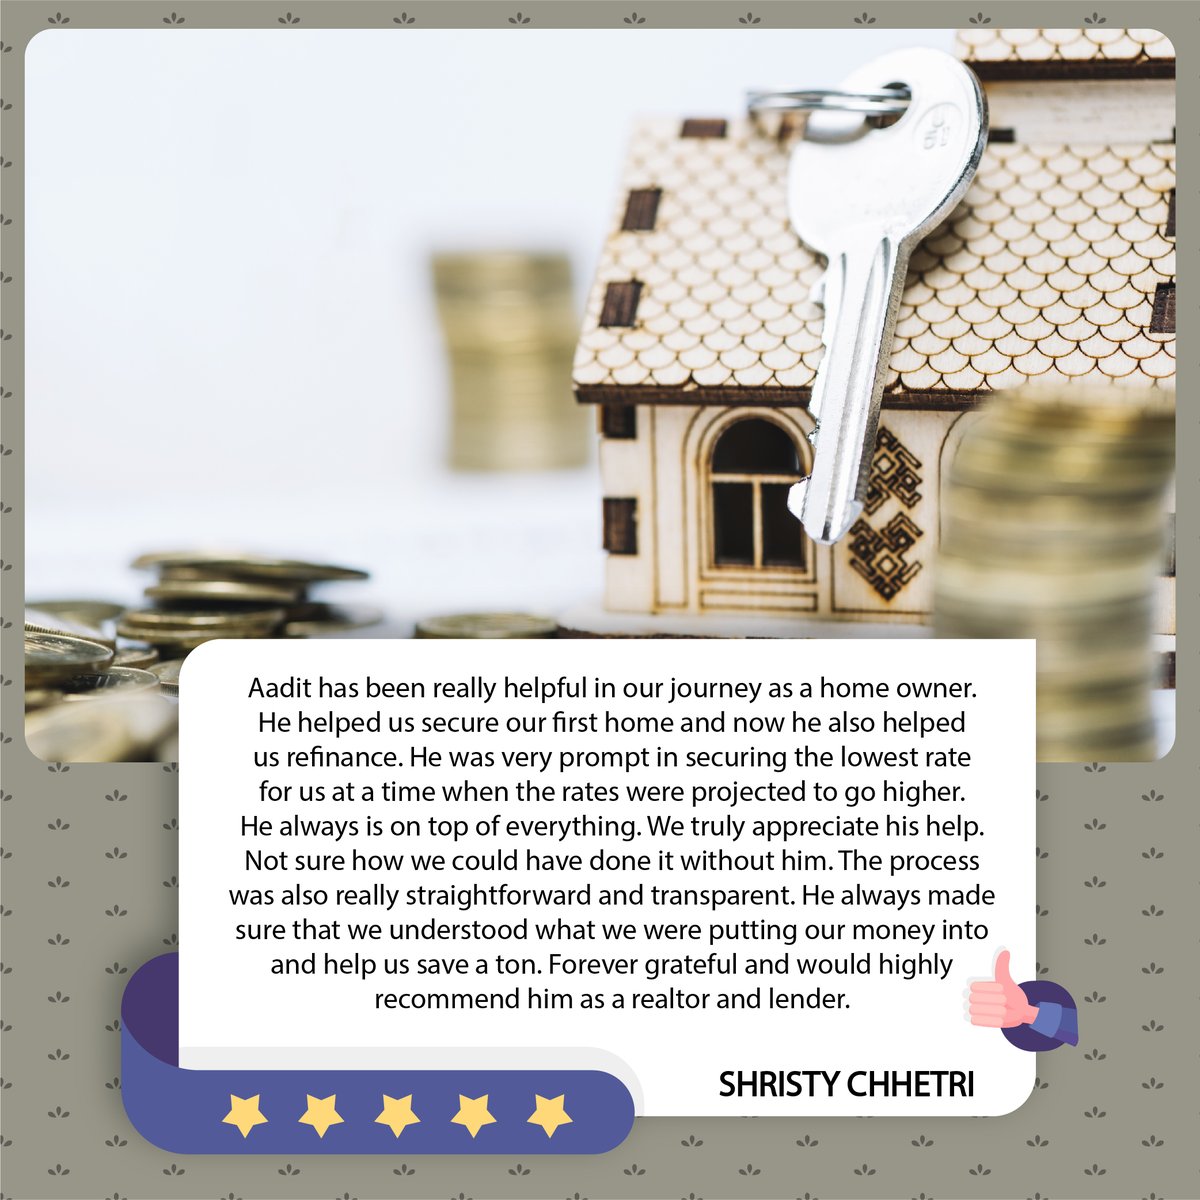 We all need people who will give us feedback. That’s how we improve. 🙂
#clientreview  #clients #clientstatisfaction #customer #shubhmortgage #usa #california #mortgage #refinanceloan #purchaseloan #mortgagerate #mortgagerates #housinginventory #loanadvisors  #homeloan